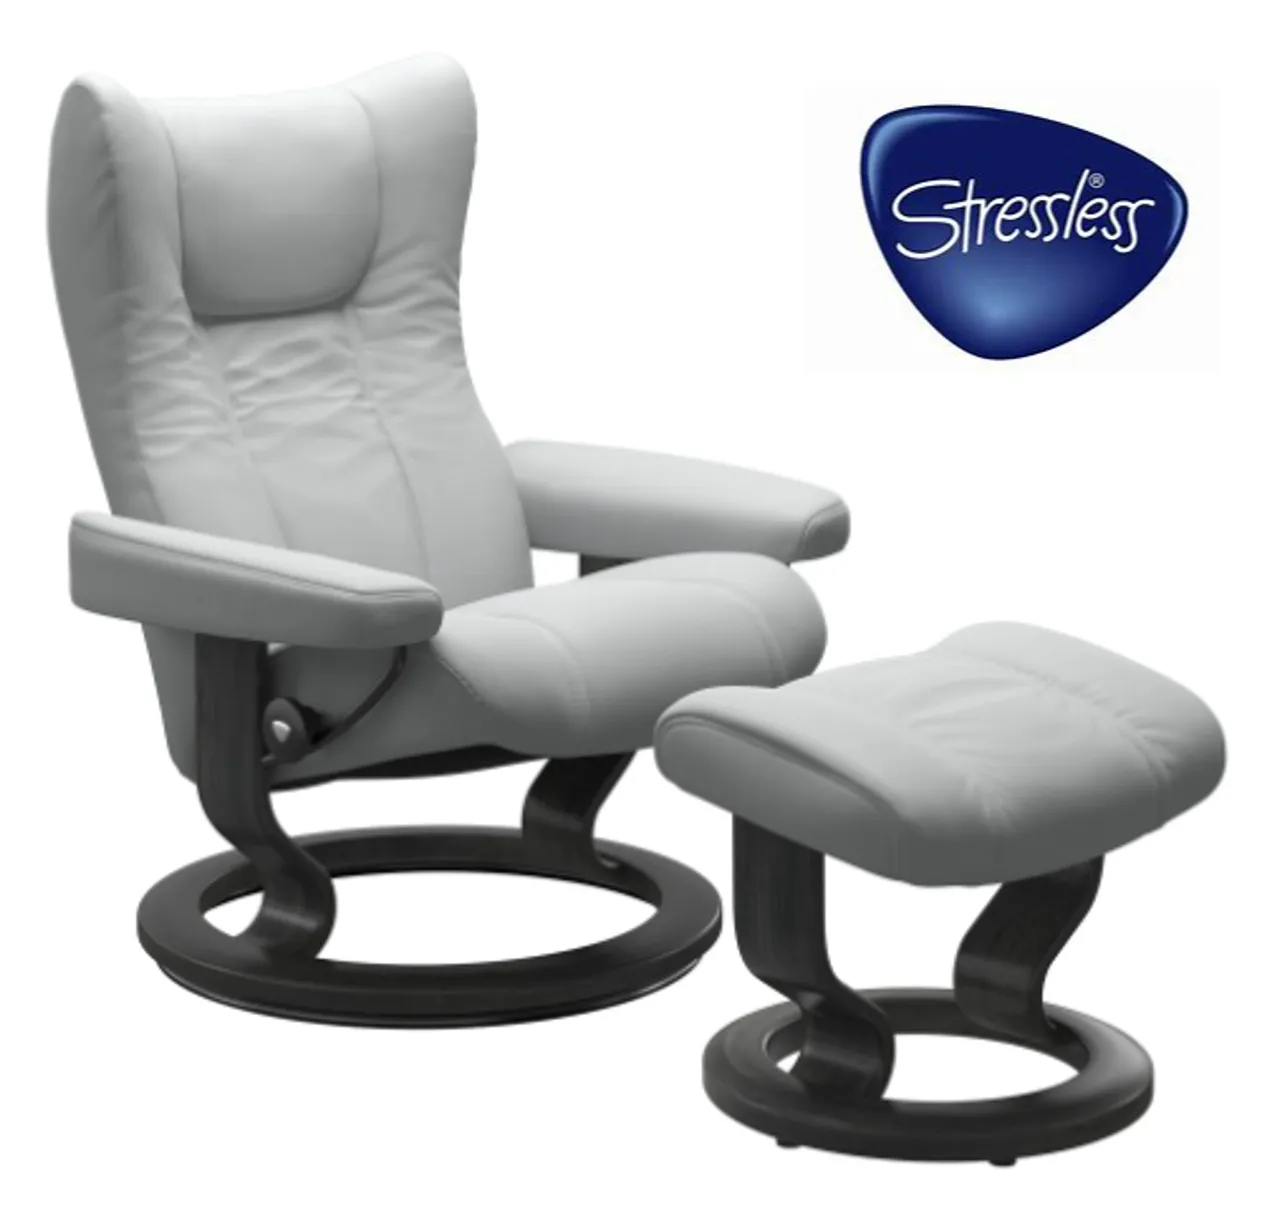 Fauteuil relaxation STRESSLESS